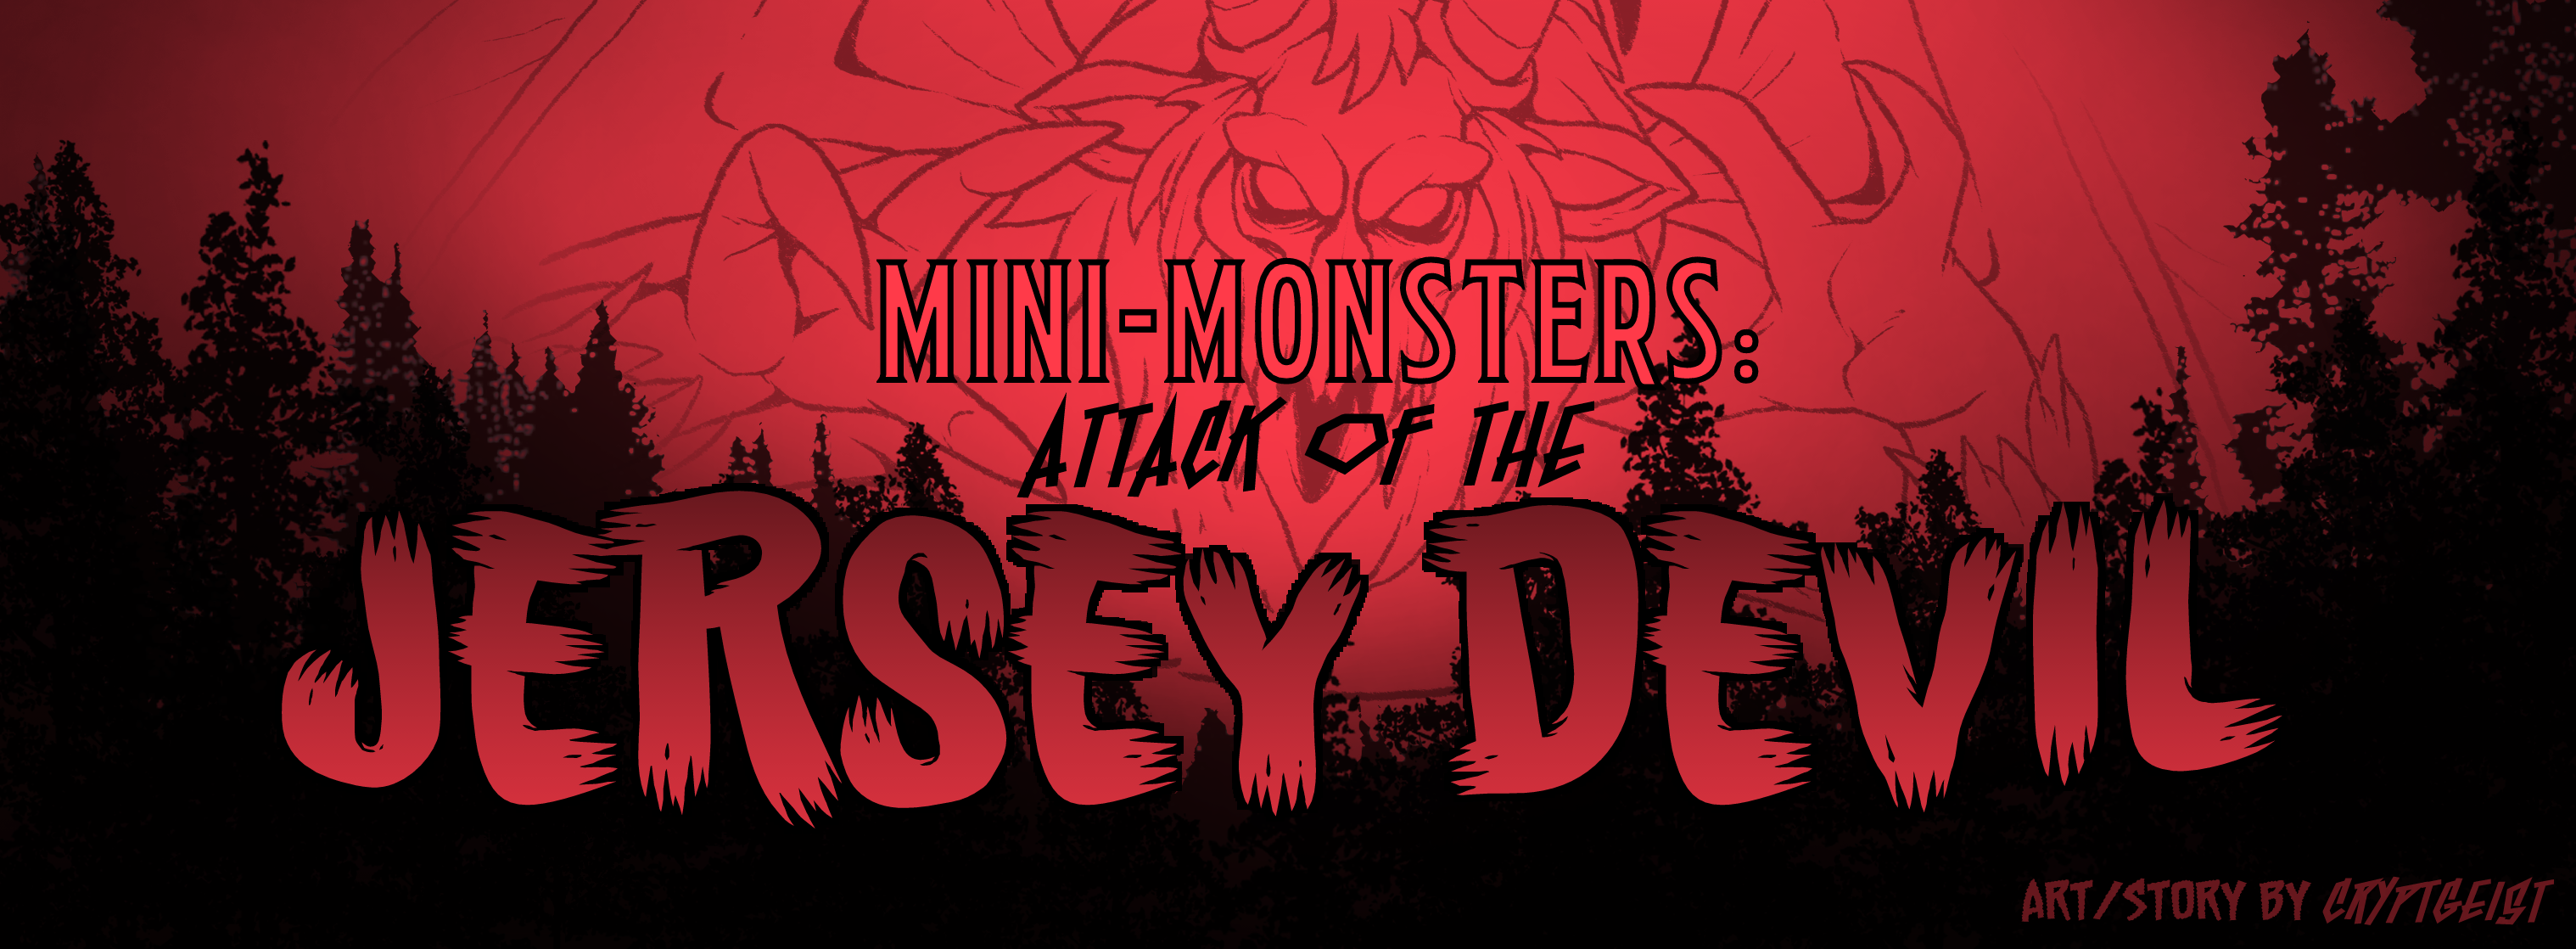 Mini-Monsters: Attack of the Jersey Devil